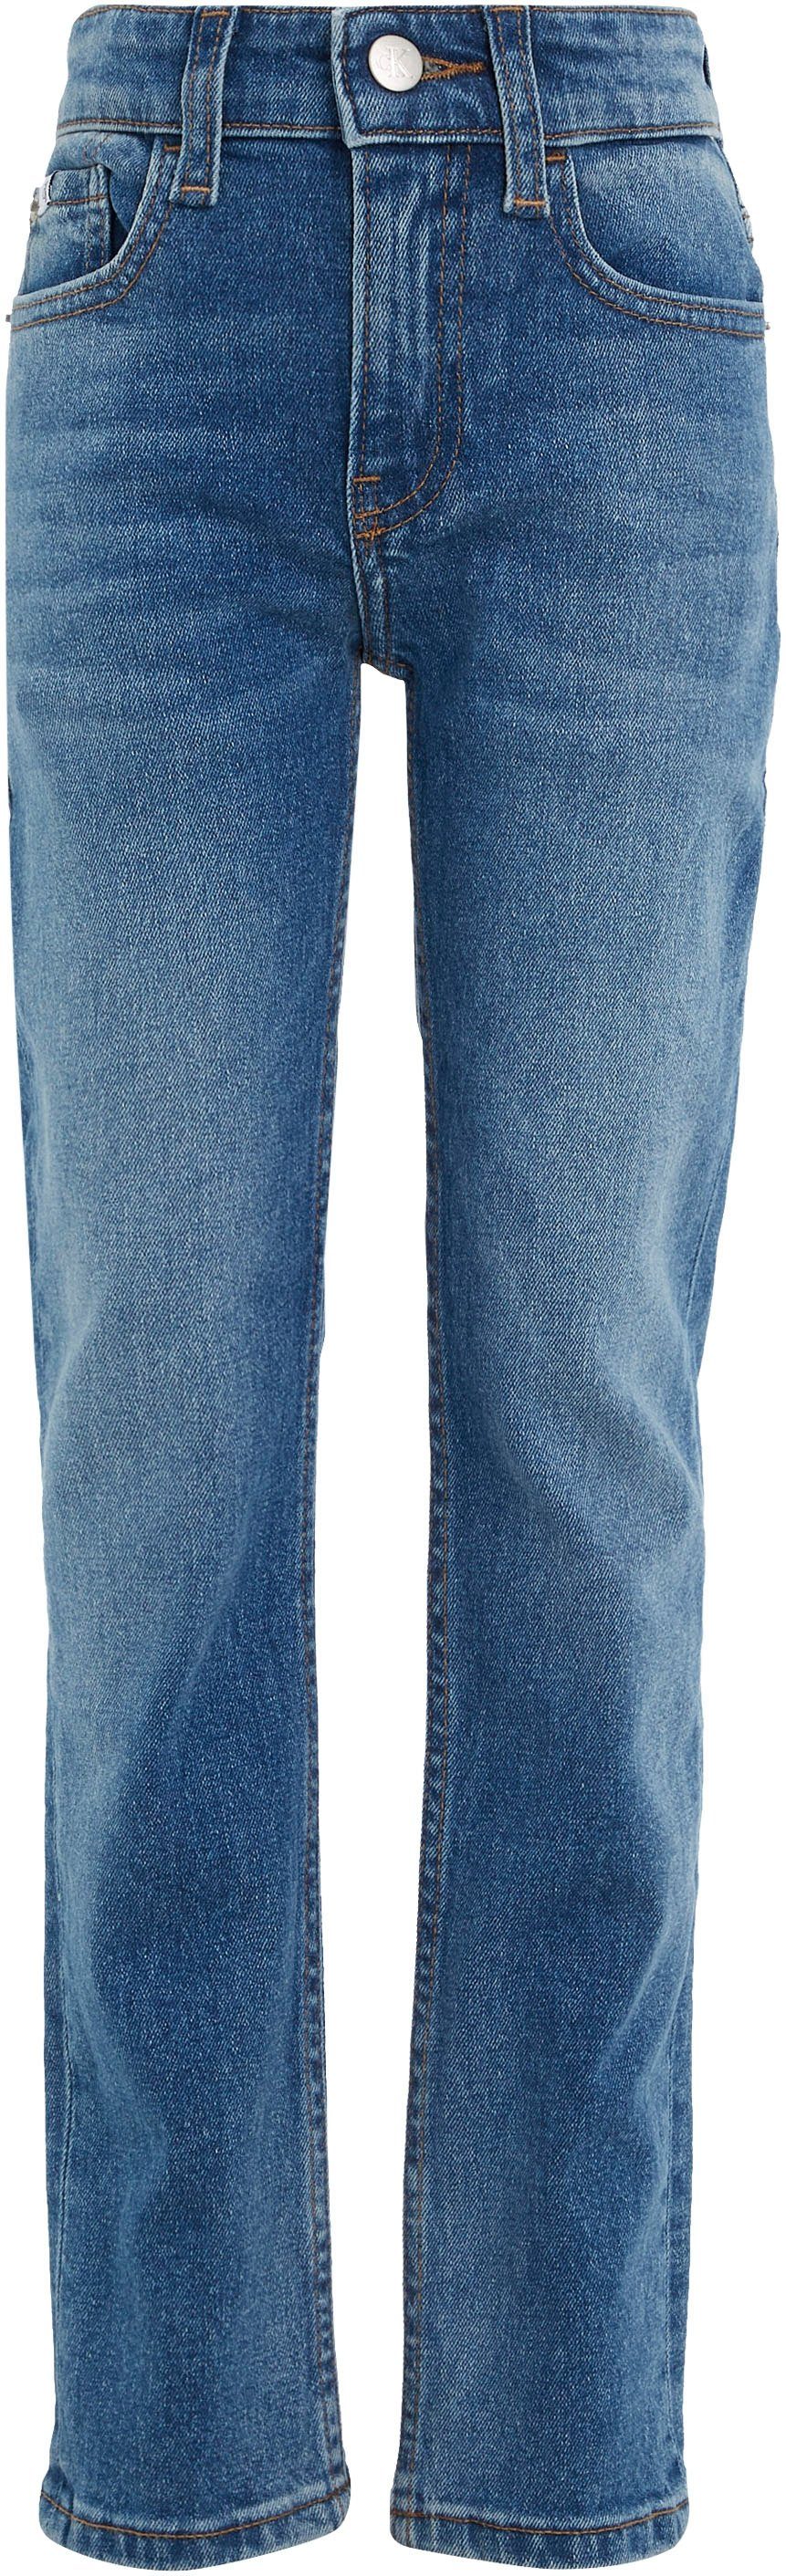 Calvin Klein Jeans Stretch-Jeans SLIM MID BLUE | Stretchjeans